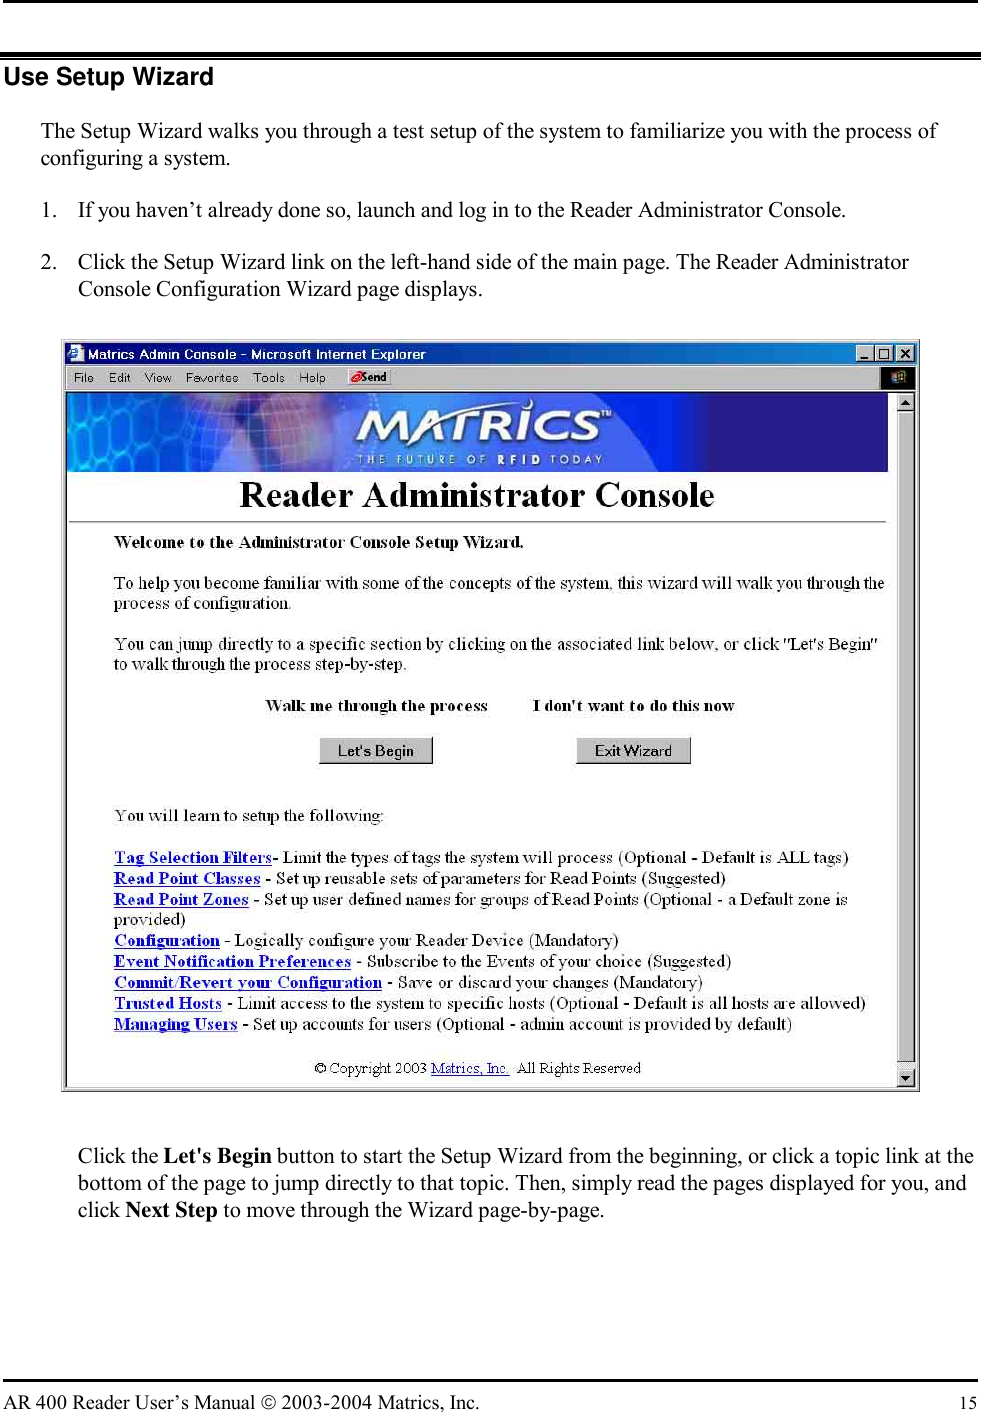   AR 400 Reader User’s Manual  2003-2004 Matrics, Inc.  15 Use Setup Wizard The Setup Wizard walks you through a test setup of the system to familiarize you with the process of configuring a system. 1.  If you haven’t already done so, launch and log in to the Reader Administrator Console. 2.  Click the Setup Wizard link on the left-hand side of the main page. The Reader Administrator Console Configuration Wizard page displays.  Click the Let&apos;s Begin button to start the Setup Wizard from the beginning, or click a topic link at the bottom of the page to jump directly to that topic. Then, simply read the pages displayed for you, and click Next Step to move through the Wizard page-by-page. 